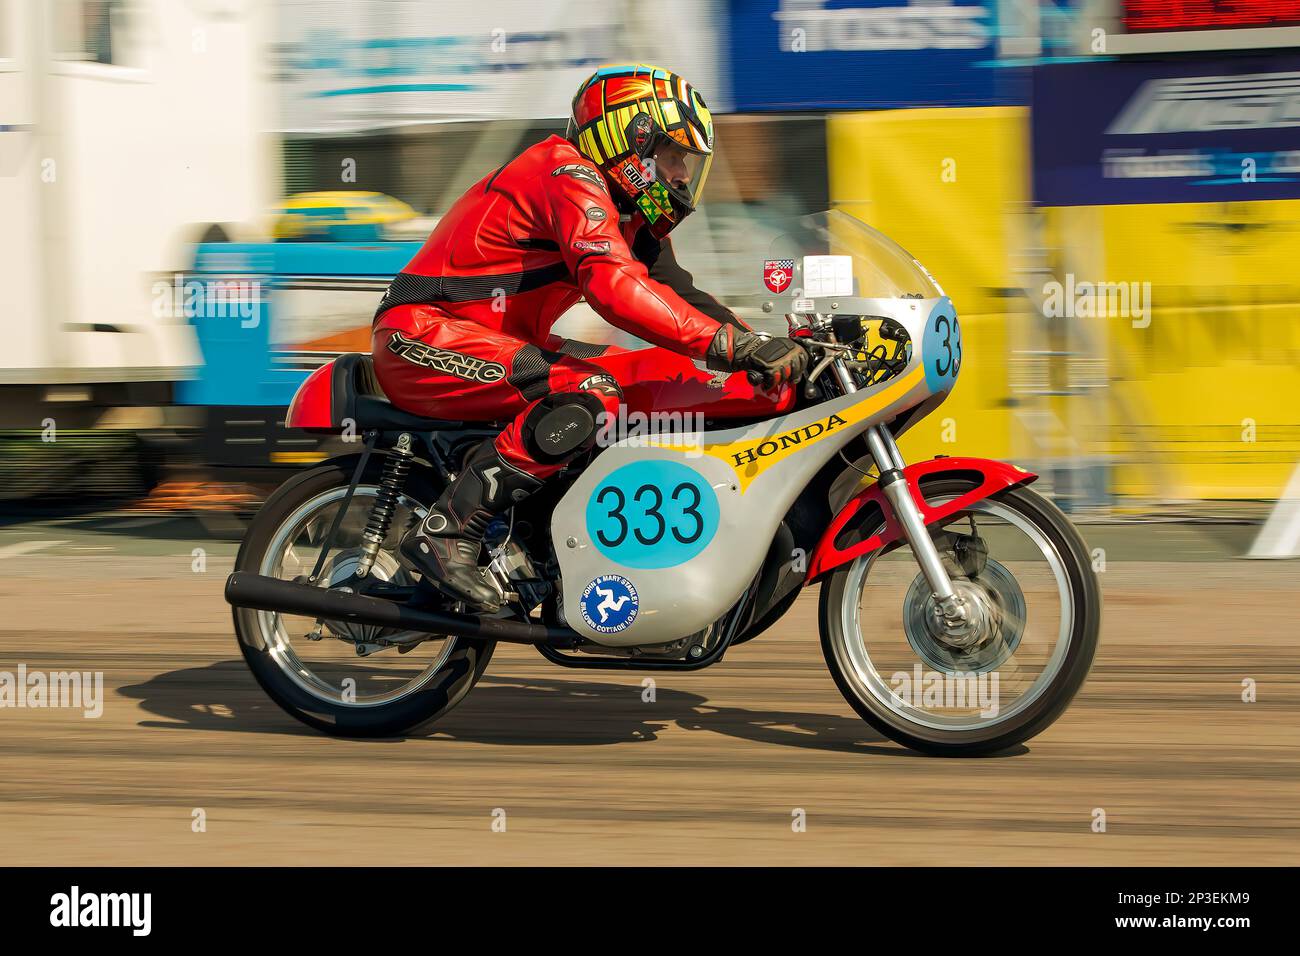 The event is currently run as a quarter mile sprint for both cars and motorcycles, held under the auspices of the Motor Sports Association. This image features David Harvey riding a Honda CR350. The event is organised by the Brighton and Hove Motor Club run along Madeira Drive, Brighton Sea Front, City of Brighton & Hove, UK. 2nd September 2017 Stock Photo